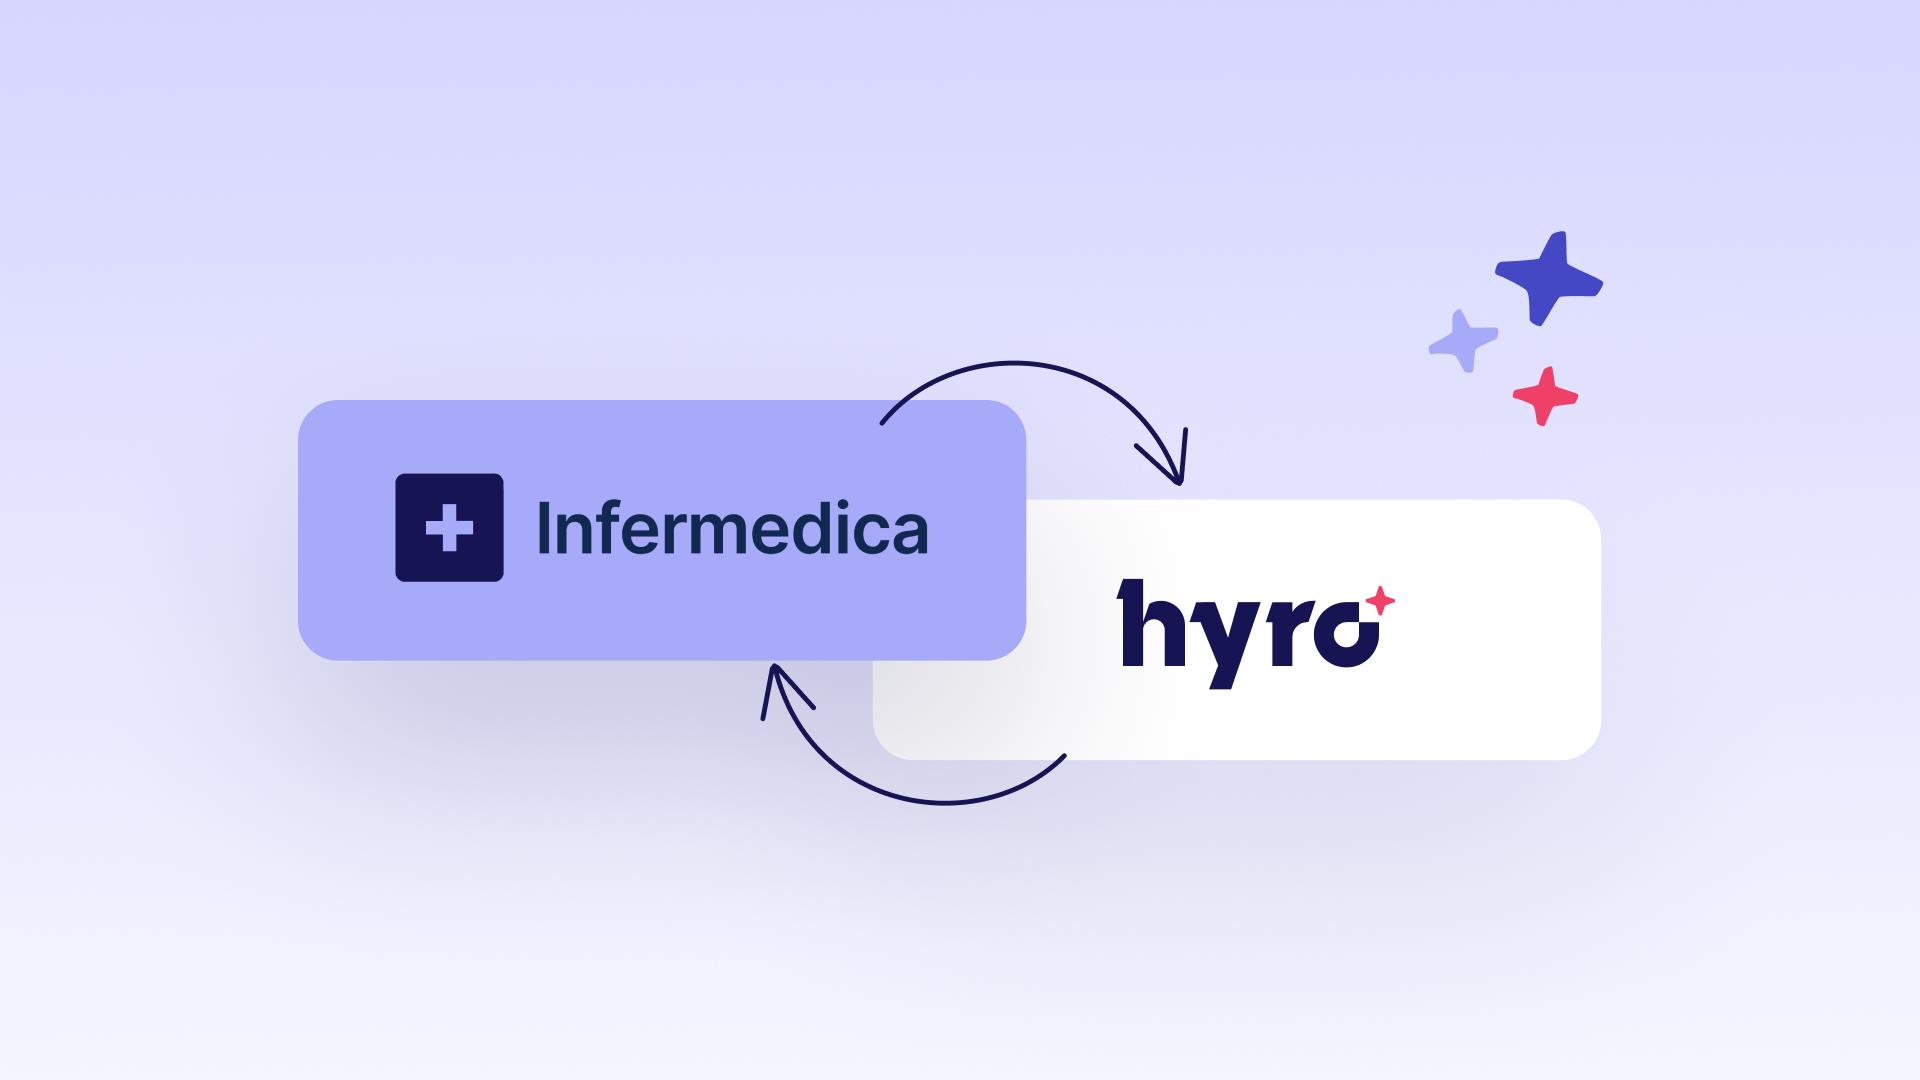 Infermedica Announces Partnership with Hyro to Support Patient Triage